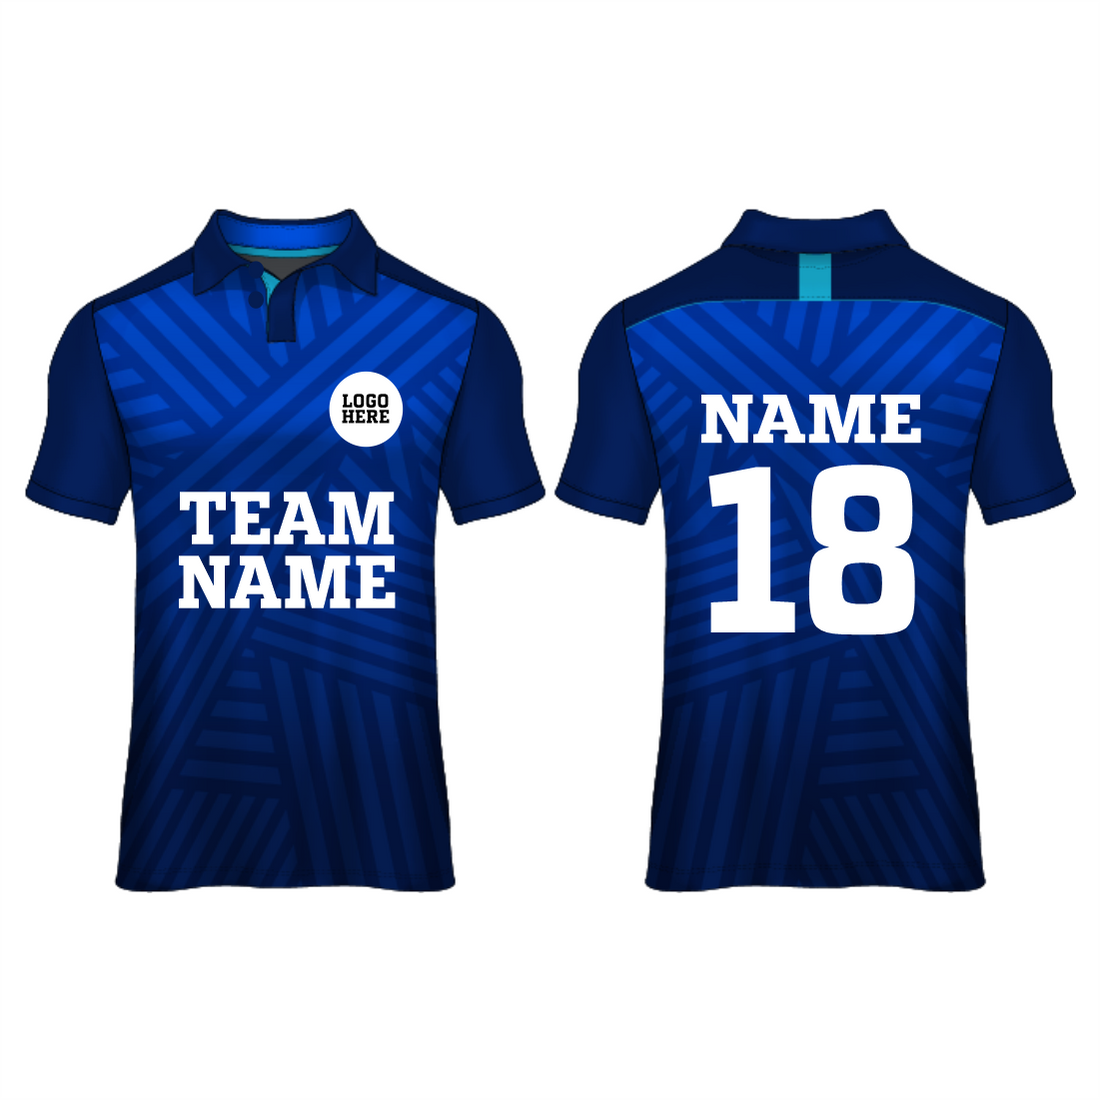 NEXT PRINT All Over Printed Customized Sublimation T-Shirt Unisex Sports Jersey Player Name & Number, Team Name And Logo. 1137509045